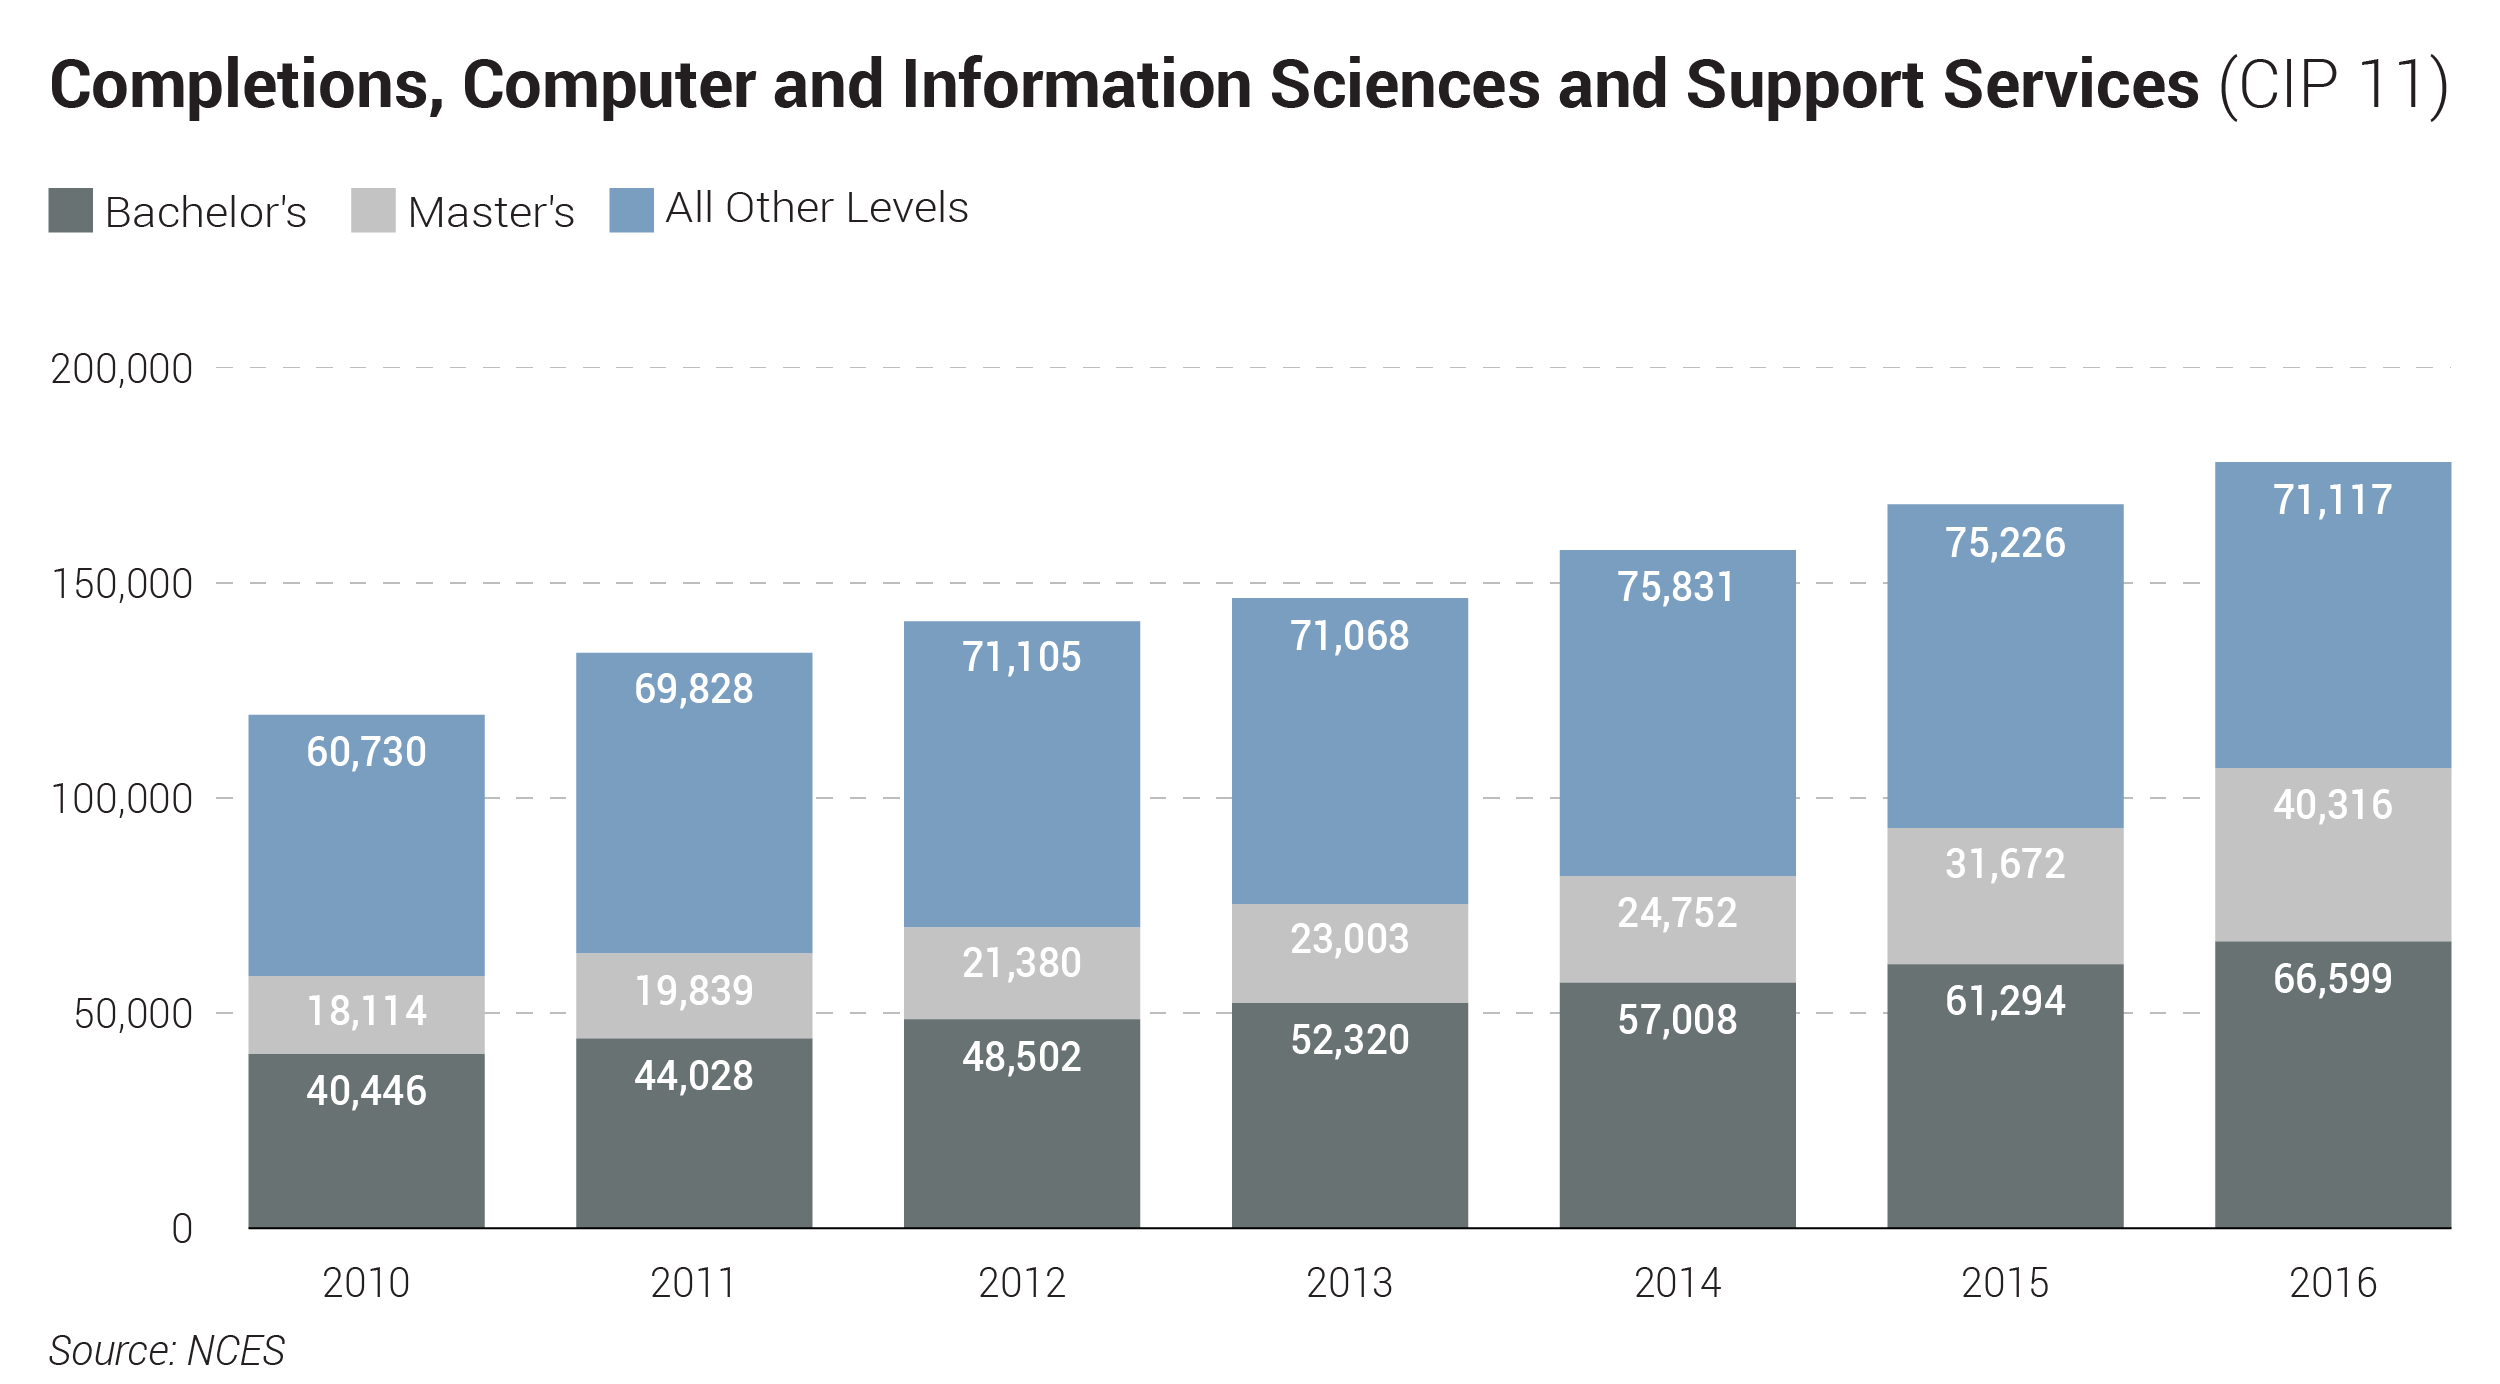 Completions, Computer and Information Sciences and Support Services (CIP 11)